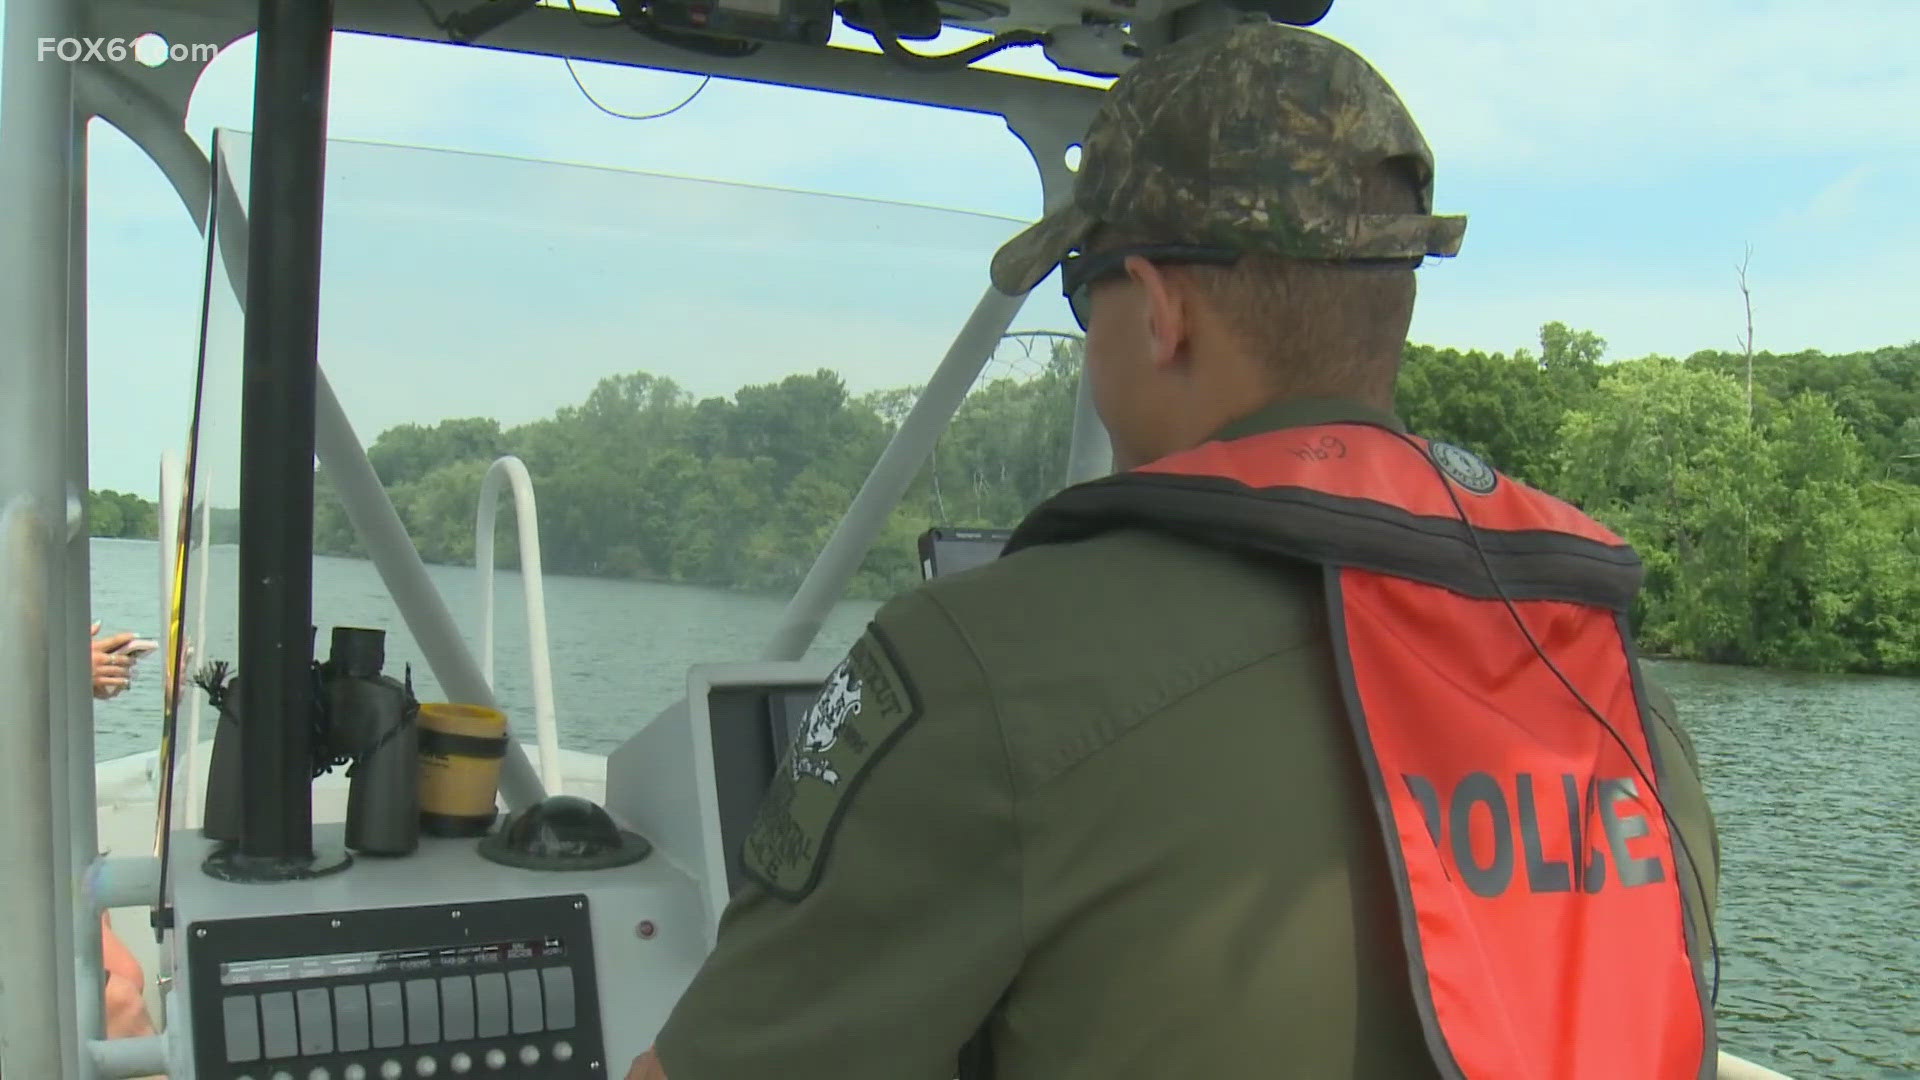 With more people on the water, the national campaign focuses on enforcement and education.